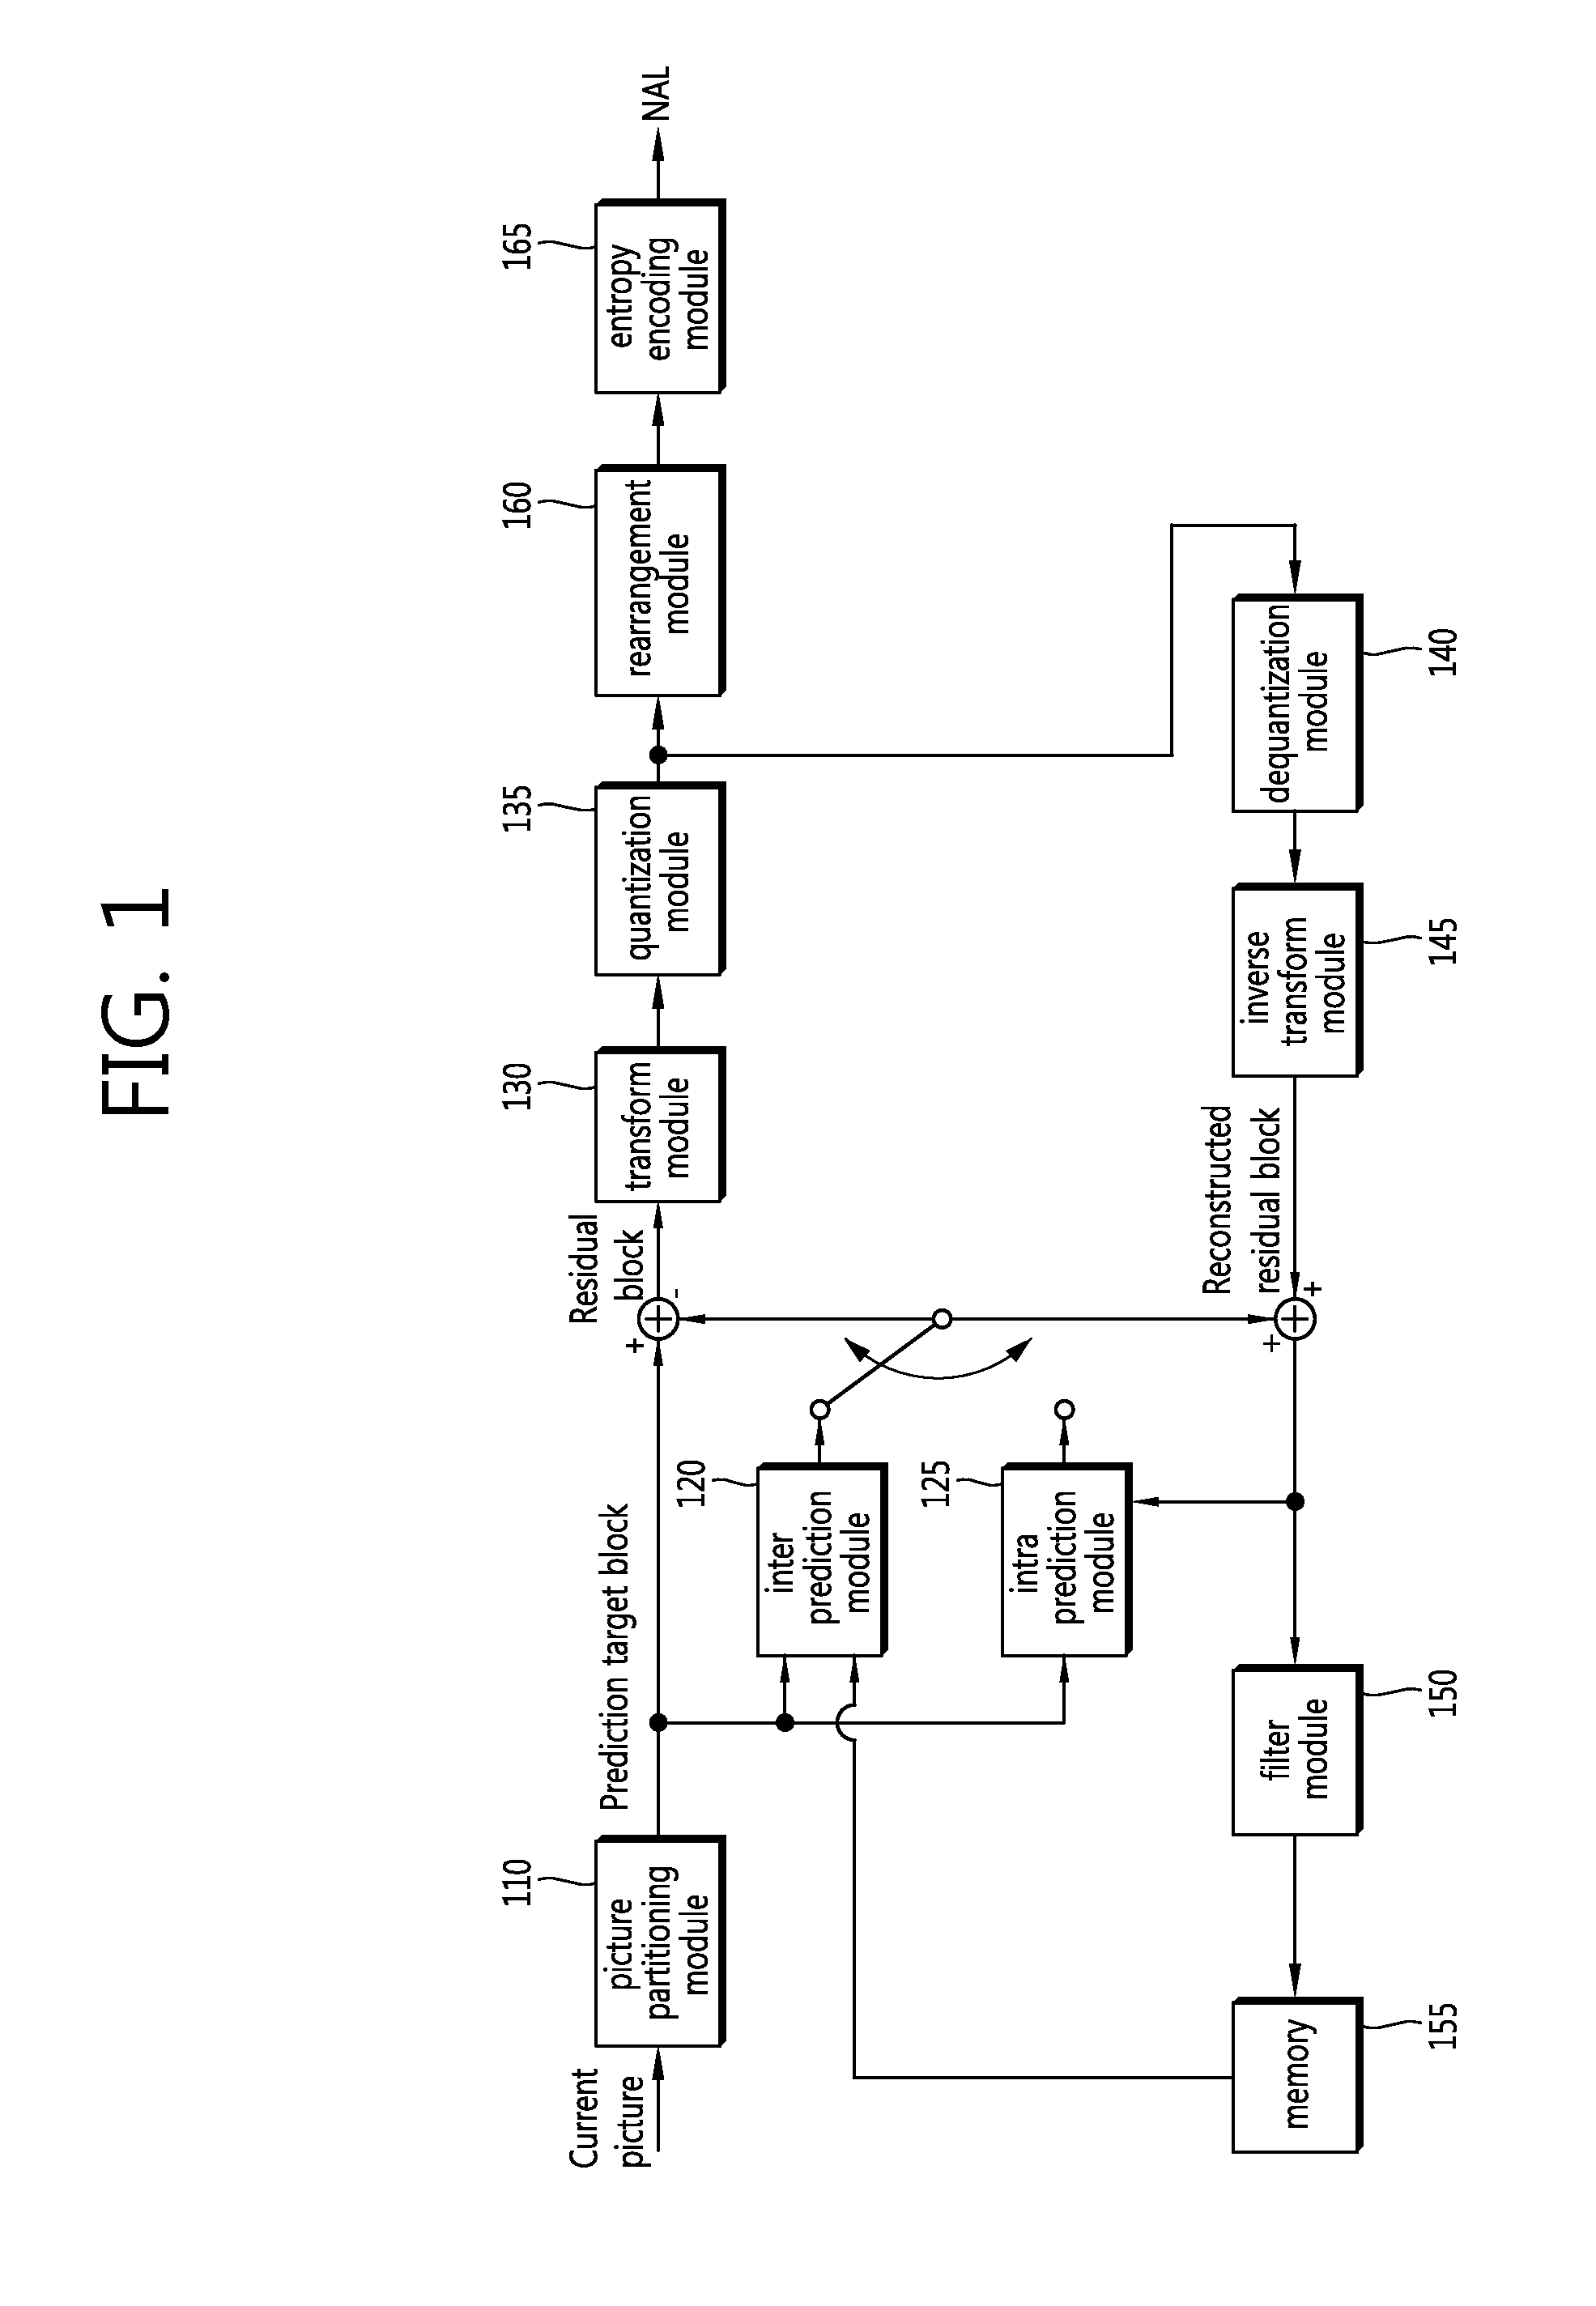 Adaptive transform method based on in-screen prediction and apparatus using the method